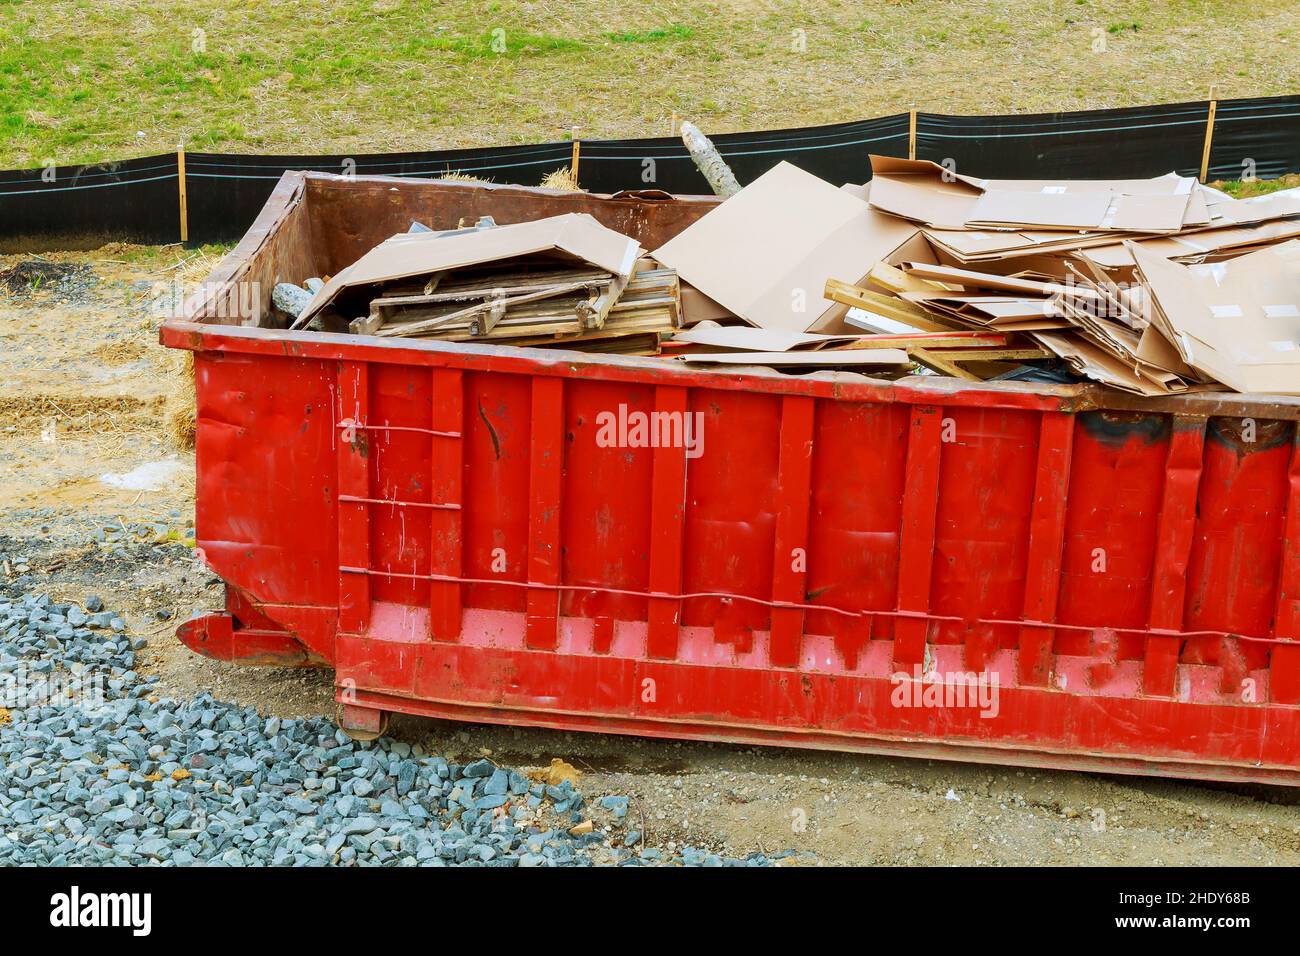 carton, recycling, recycled paper, cartons, recycle, recycled papers Stock Photo